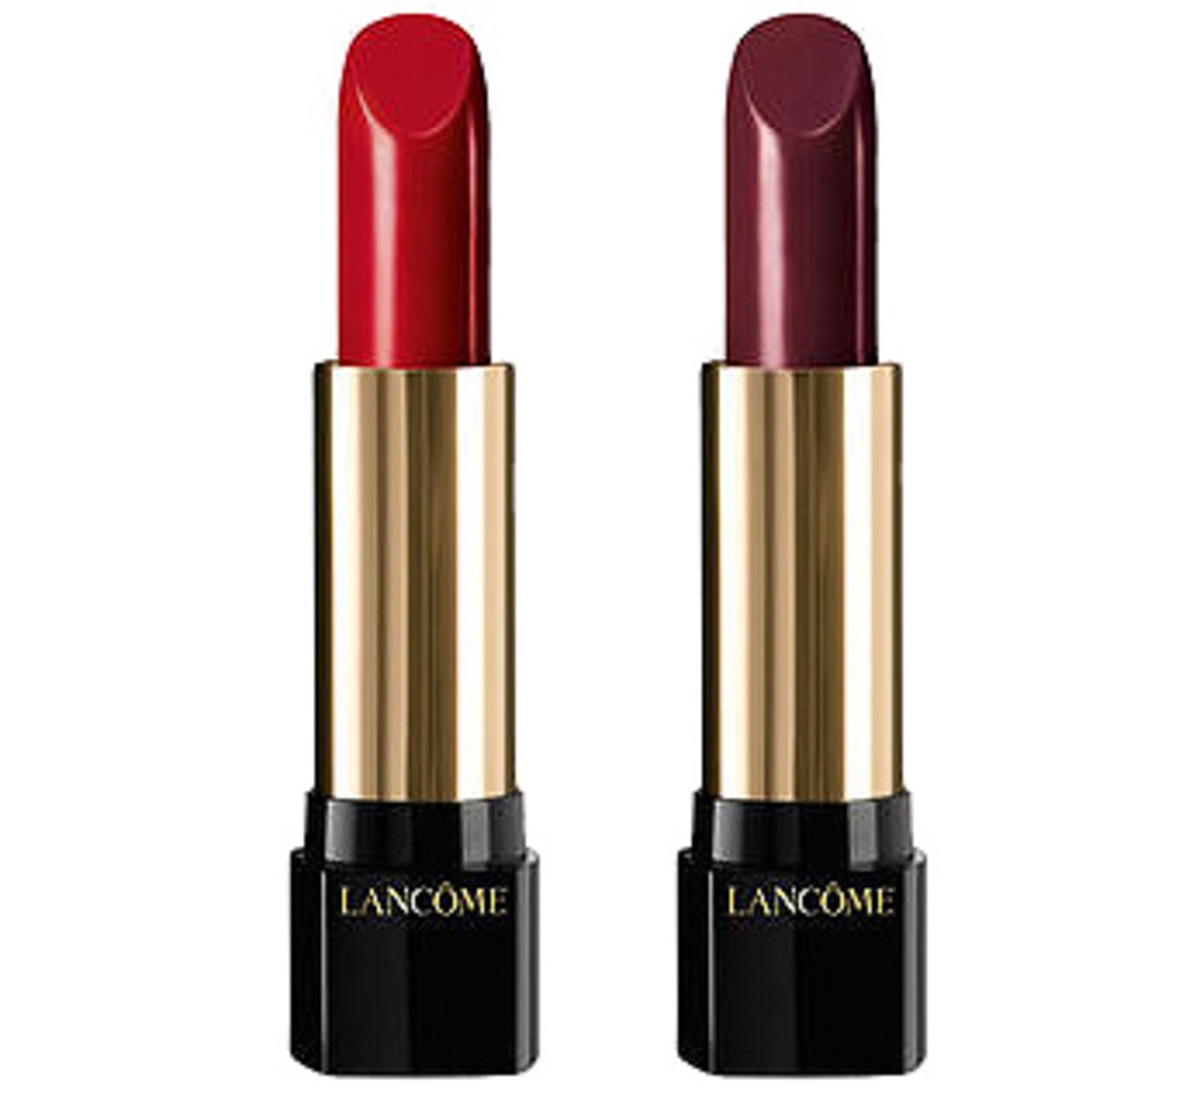 Lancome Holiday 2014_limited-edition Lancome Absolu Rouge Lipstick in 165 and 484